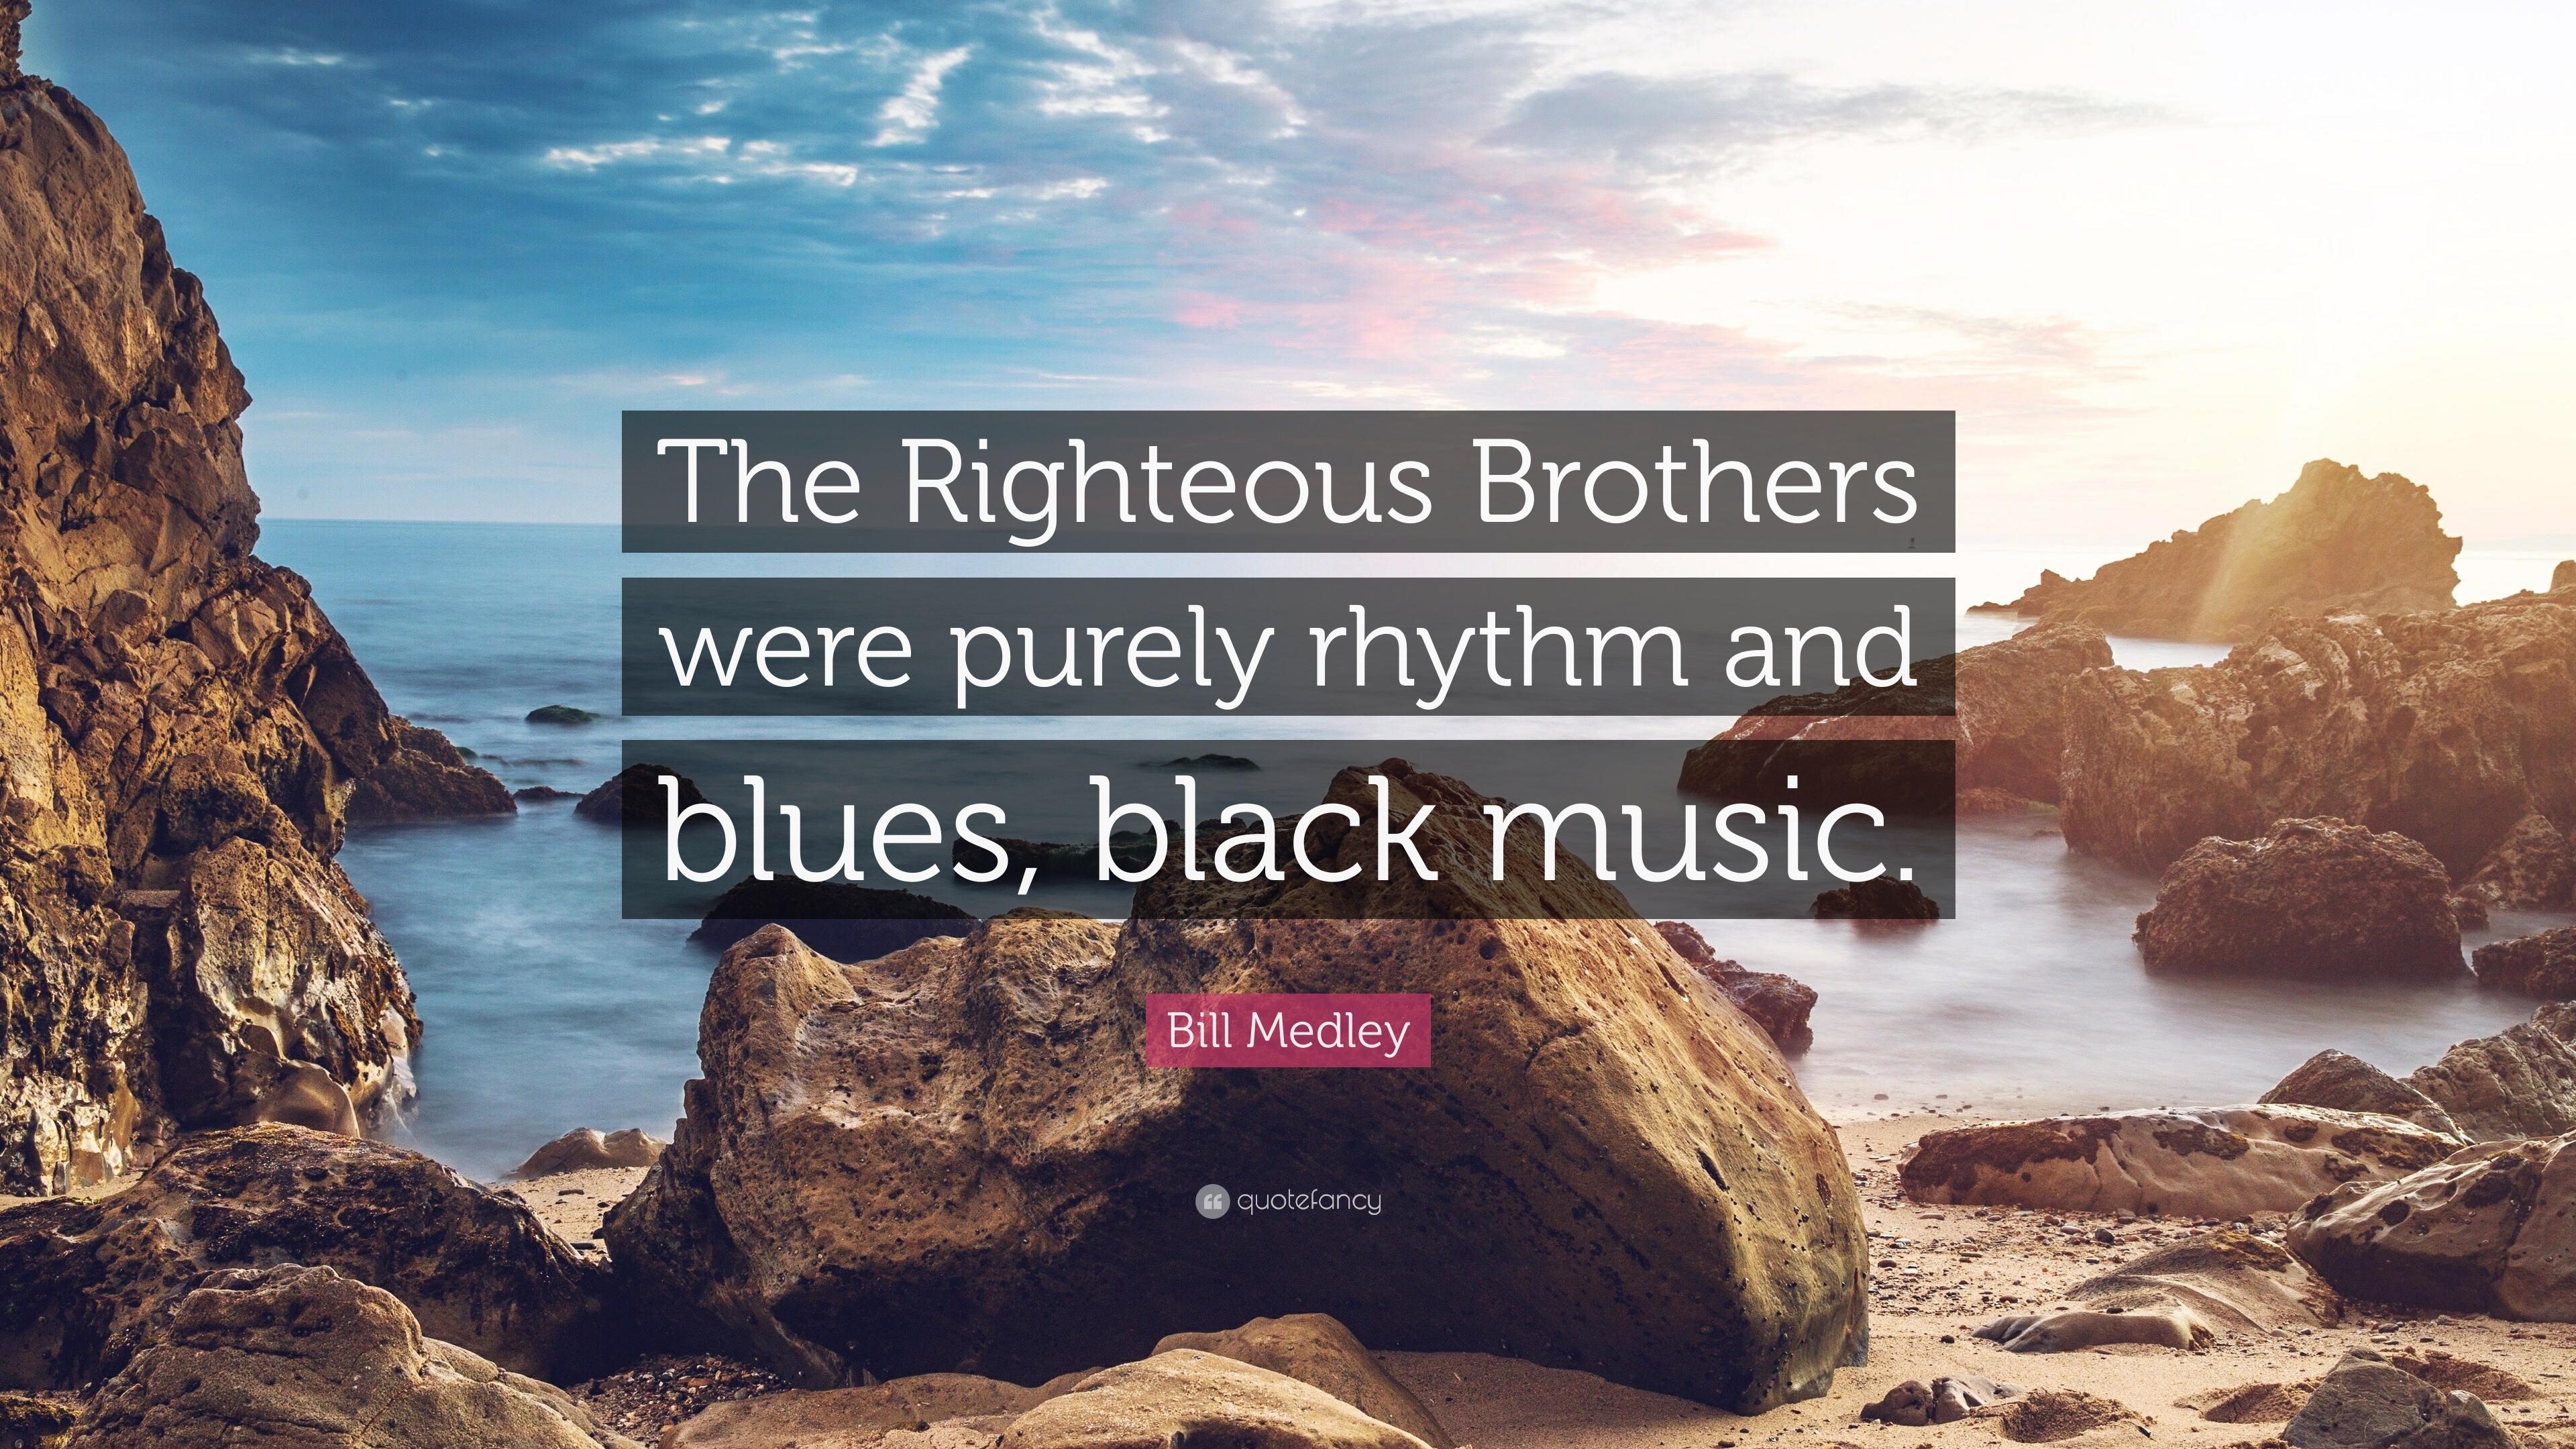 Bill Medley Quote: “The Righteous Brothers were purely rhythm